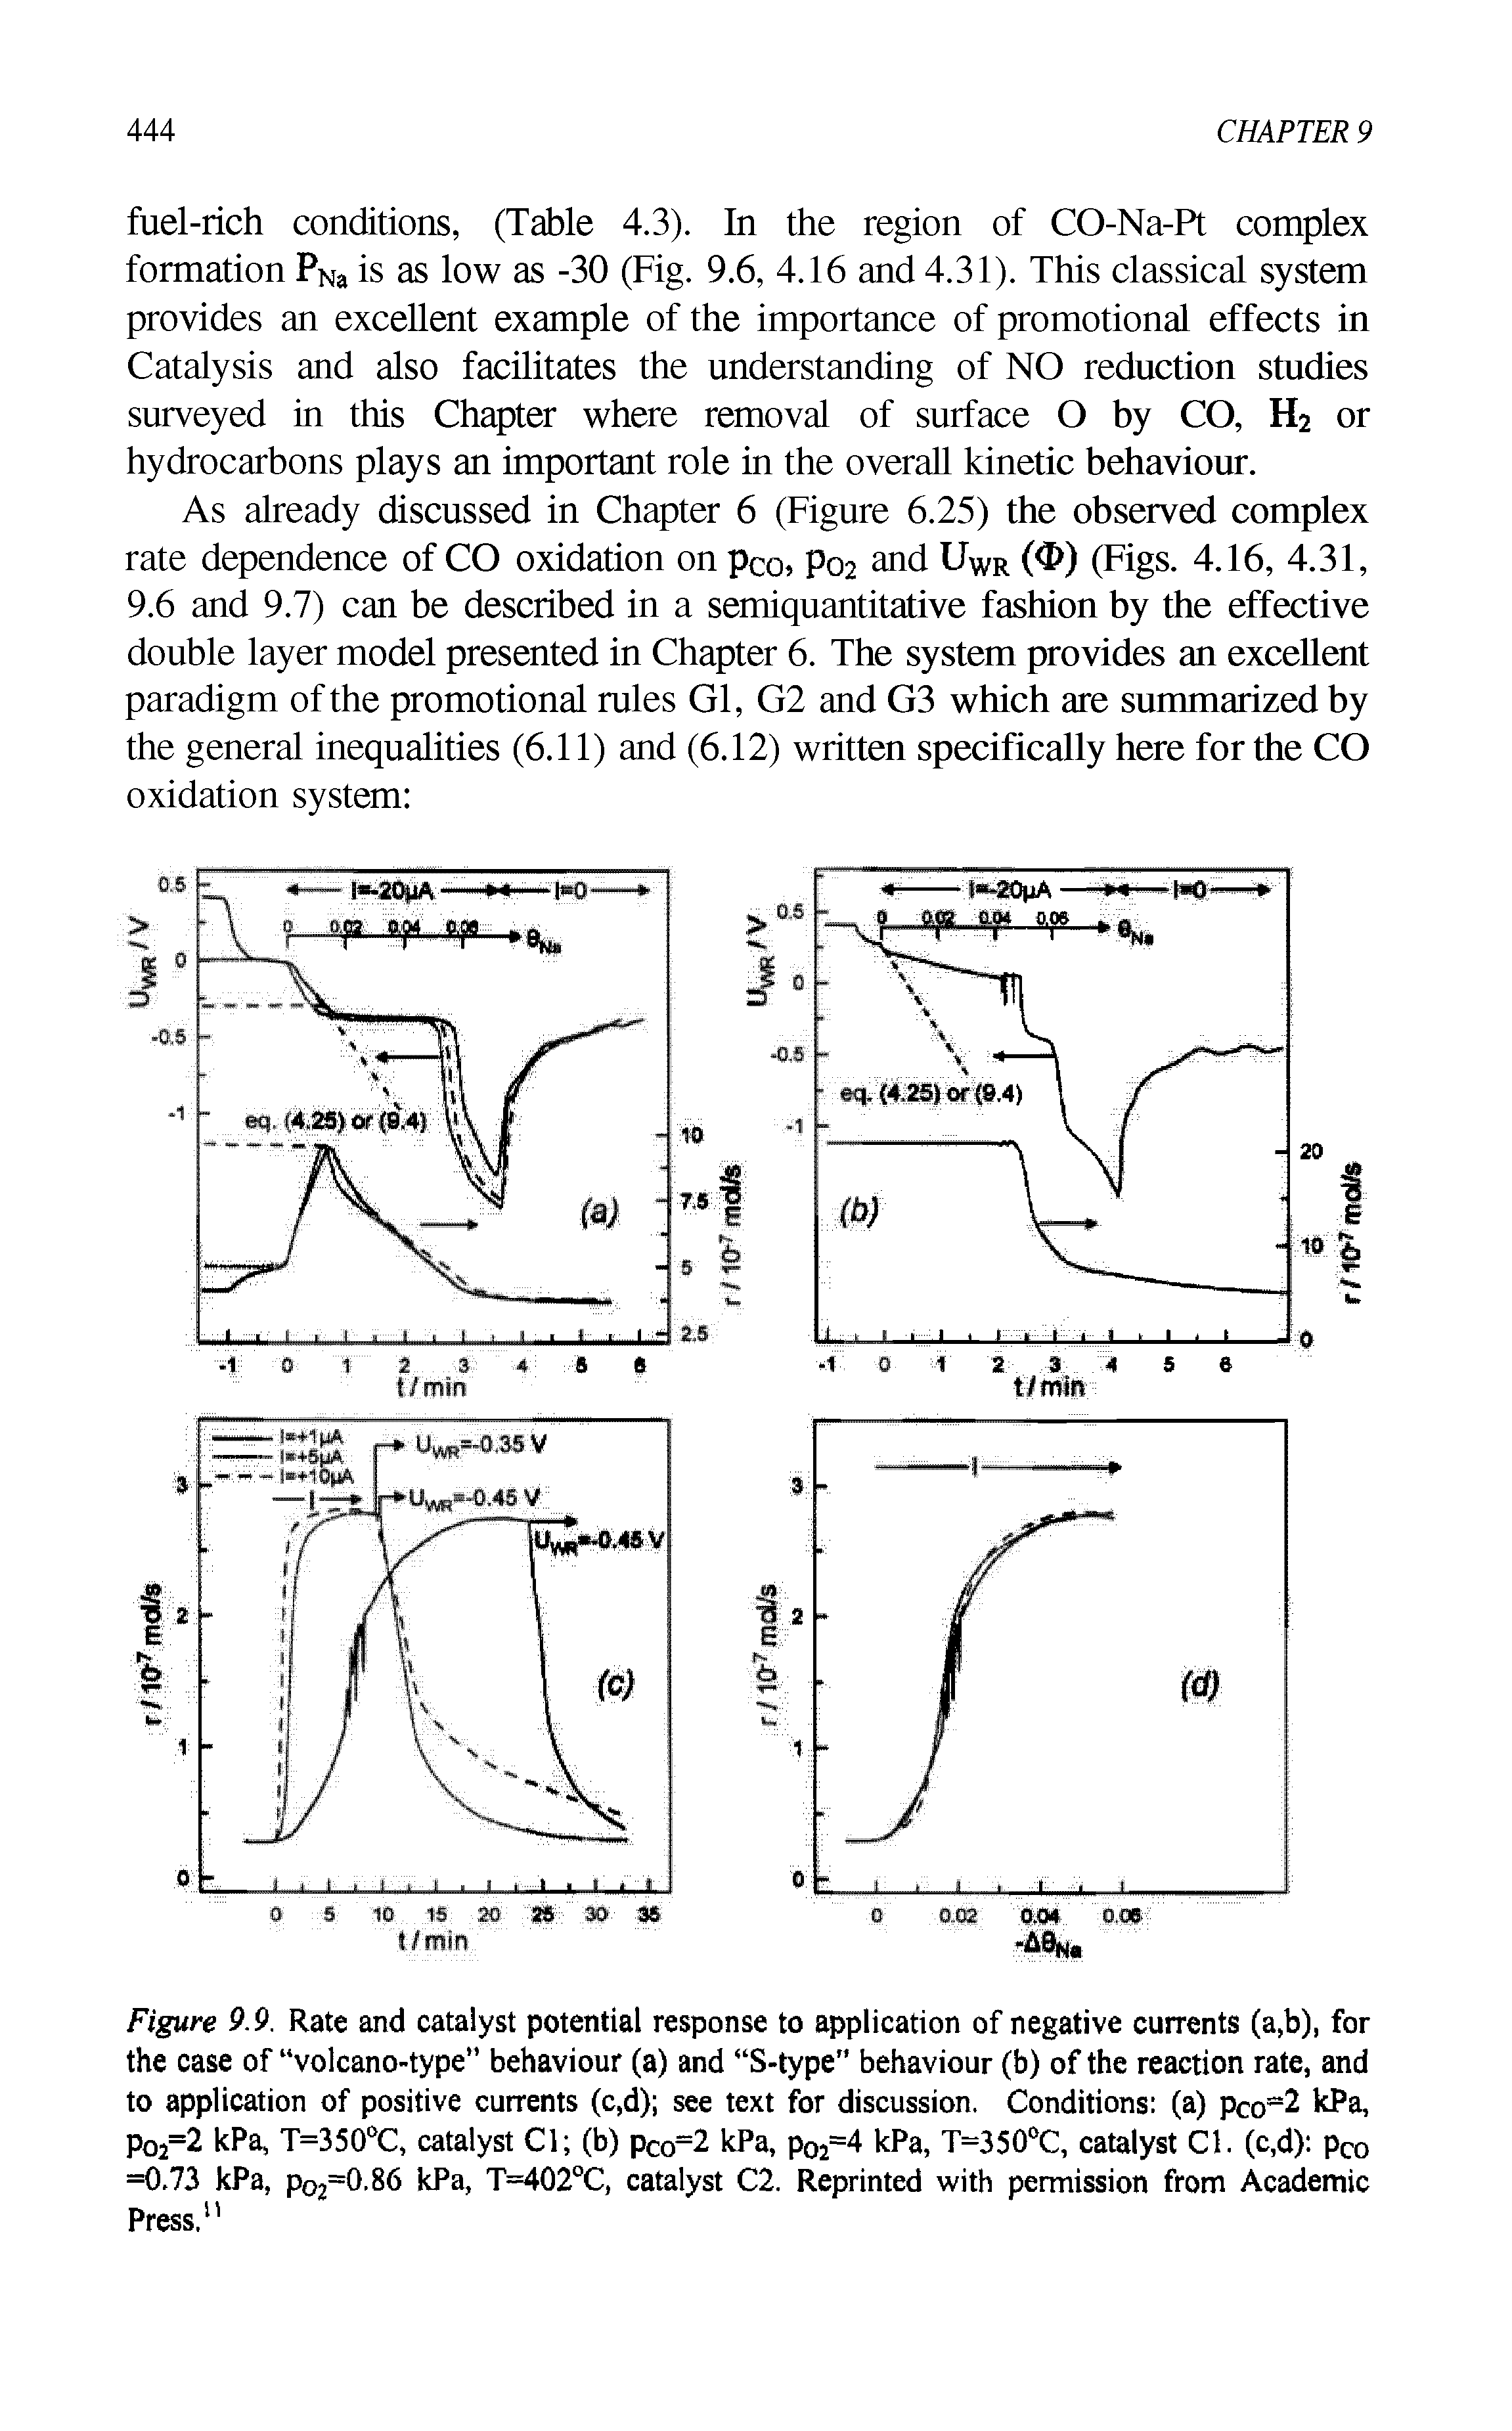 Figure 9.9. Rate and catalyst potential response to application of negative currents (a,b), for the case of volcano-type" behaviour (a) and S-type behaviour (b) of the reaction rate, and to application of positive currents (c,d) see text for discussion. Conditions (a) pco 2 kPa, Po2=2 kPa, T=350°C, catalyst Cl (b) pCo=2 kPa, p02=4 kPa, T=350°C, catalyst Cl. (c,d) pCo =0.73 kPa, po2=0.86 kPa, T=402°C, catalyst C2. Reprinted with permission from Academic Press.1 ...